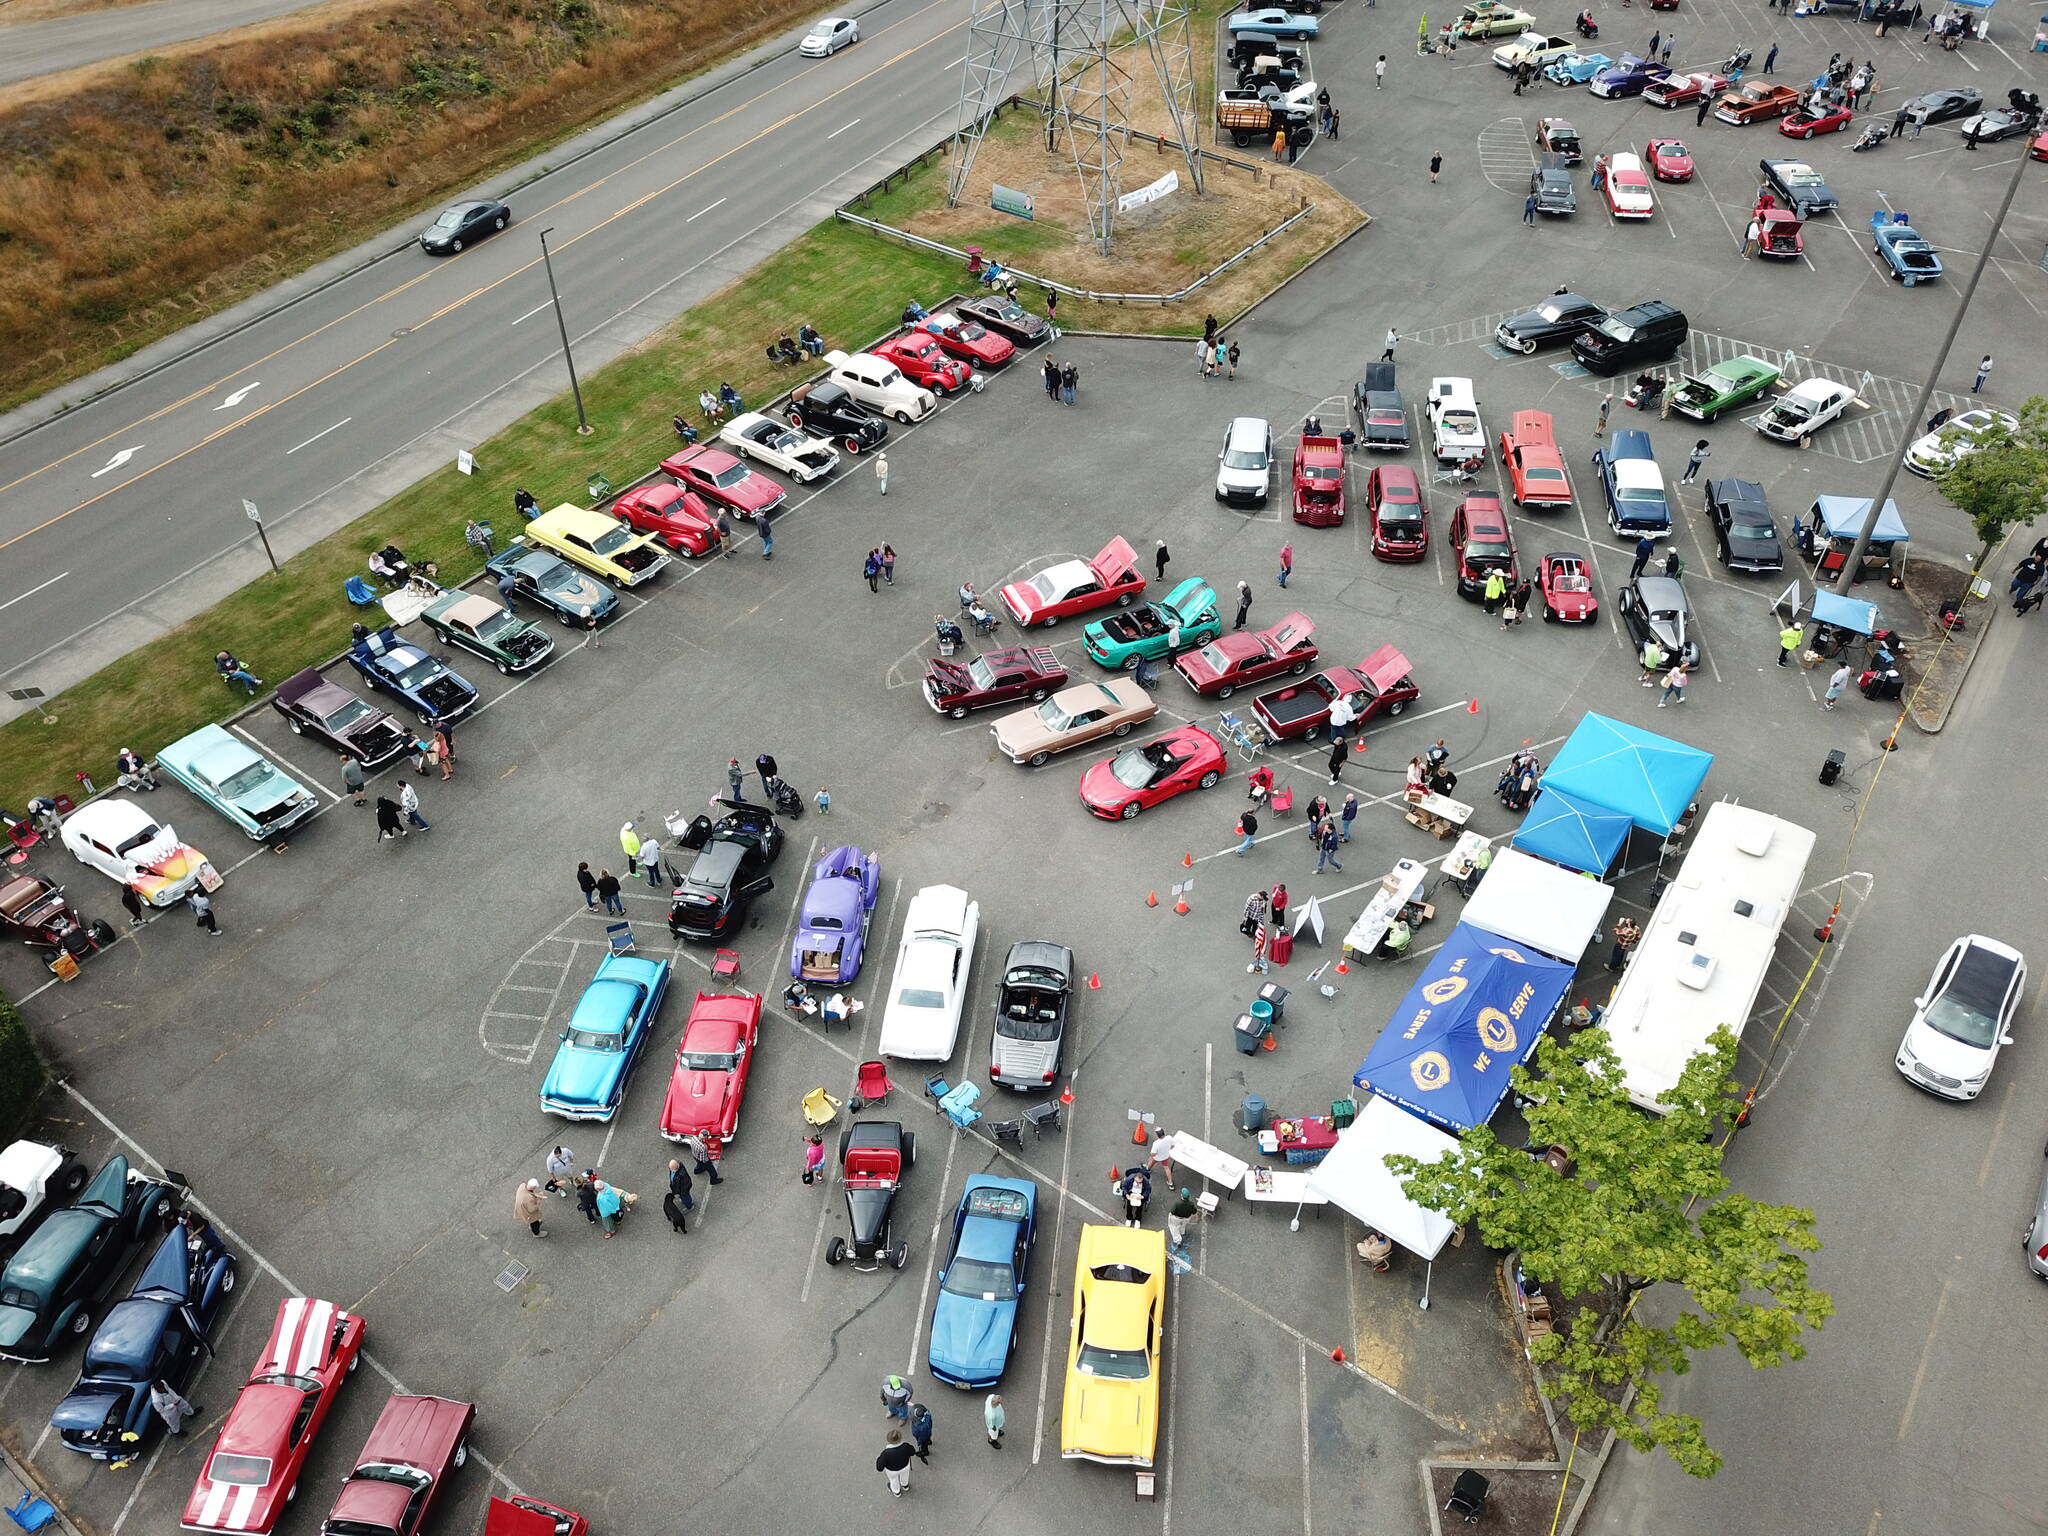 Over 100 vehicles, new and old, gathered for the 17th annual Lions Club car show on Saturday, Aug. 27. Photo courtesy of Bruce Honda